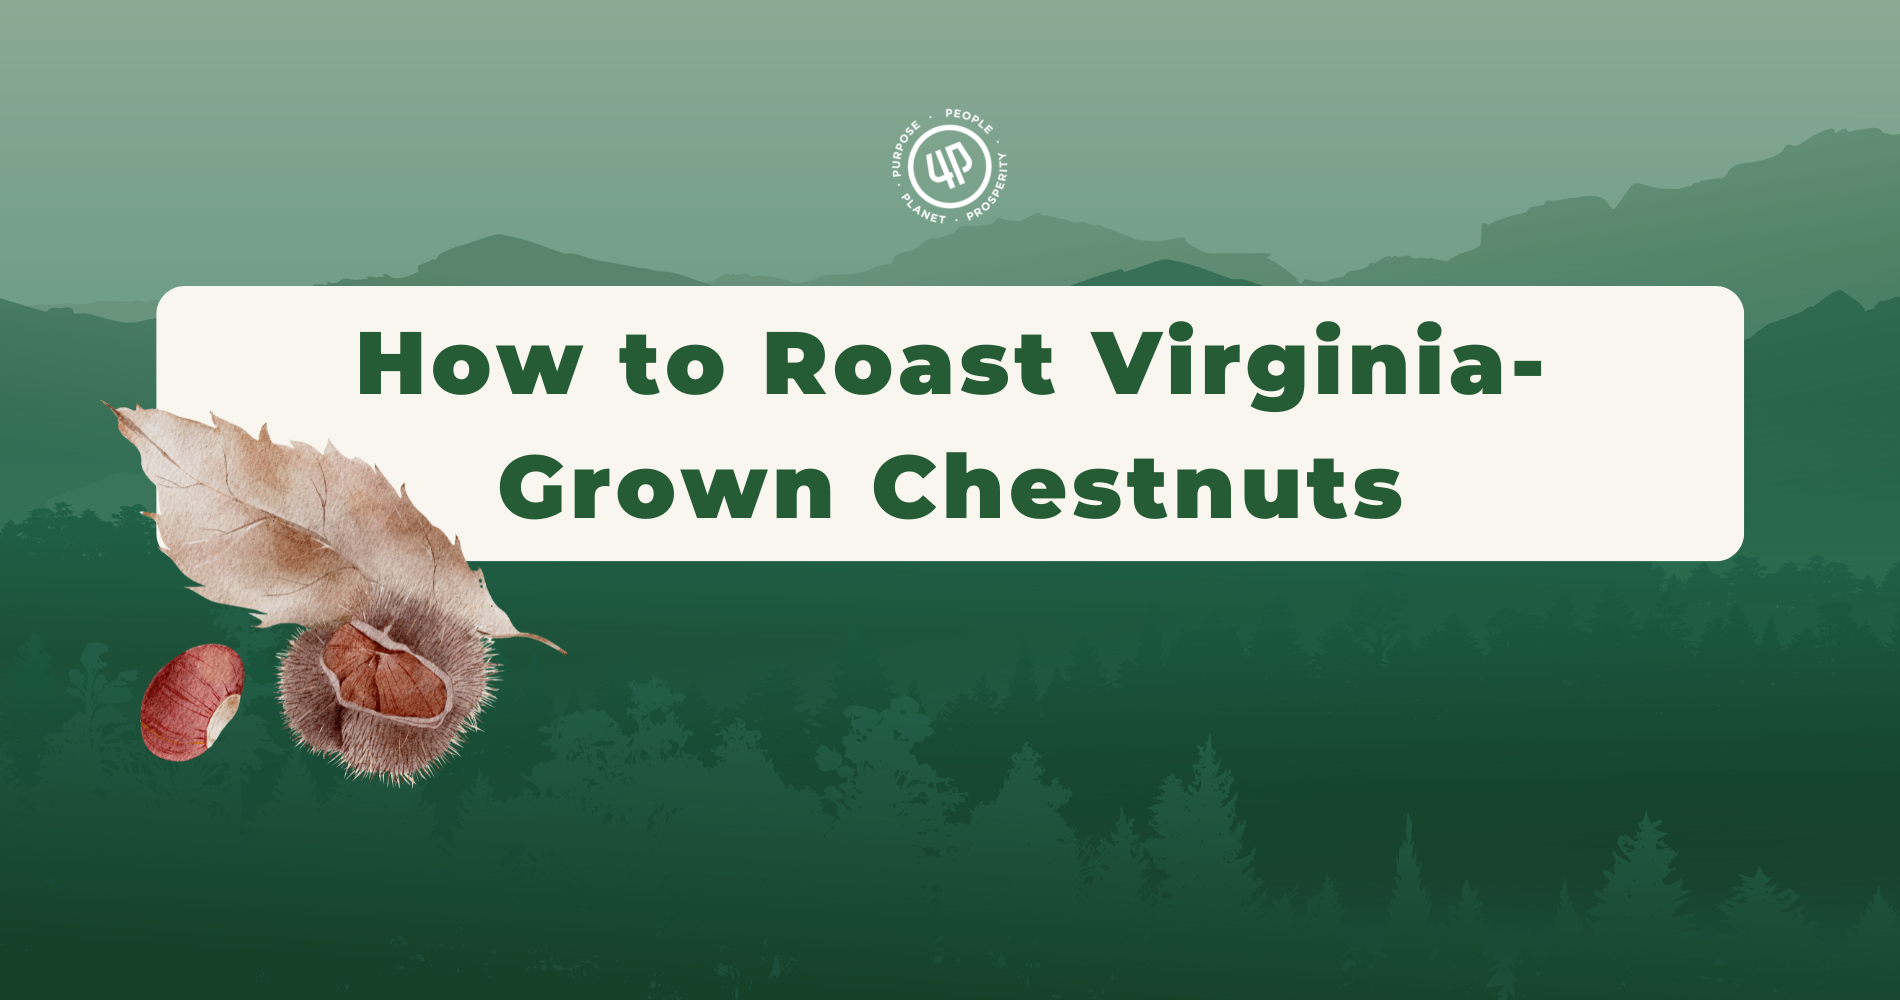 Chestnuts About This: How to Roast Virginia-Grown Chestnuts image